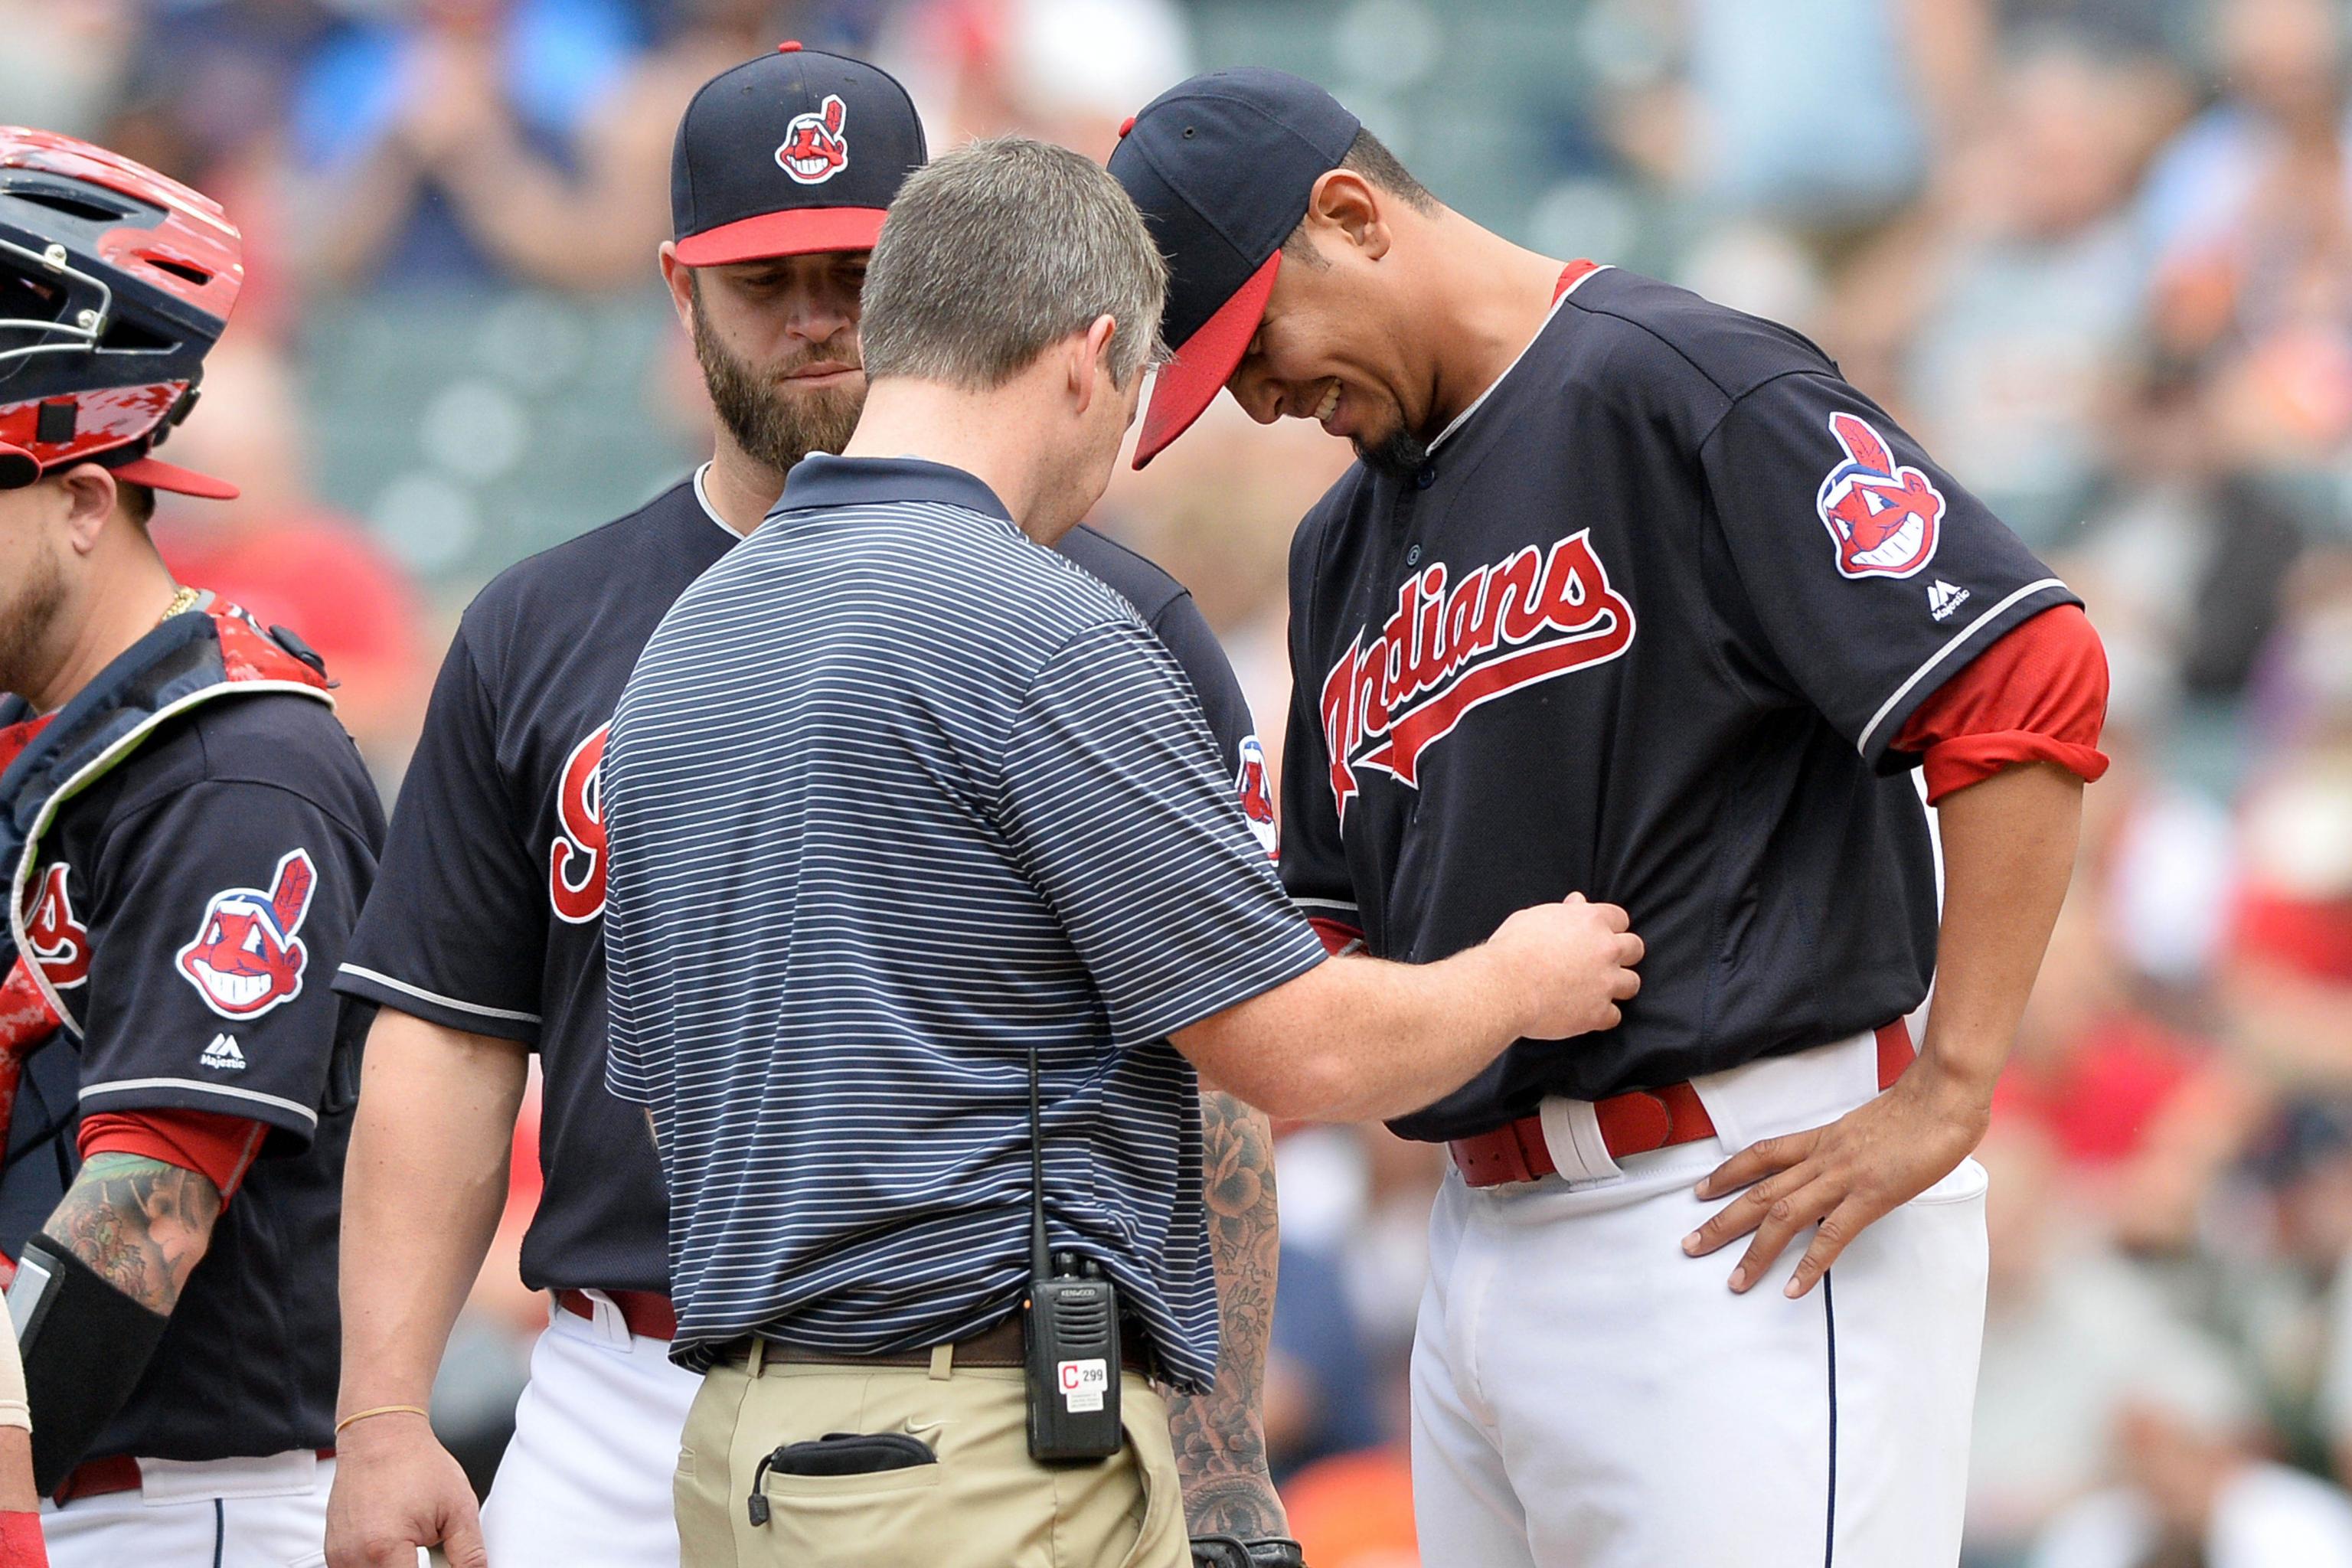 Indians ace Corey Kluber breaks forearm after being hit by line drive, Cleveland Guardians